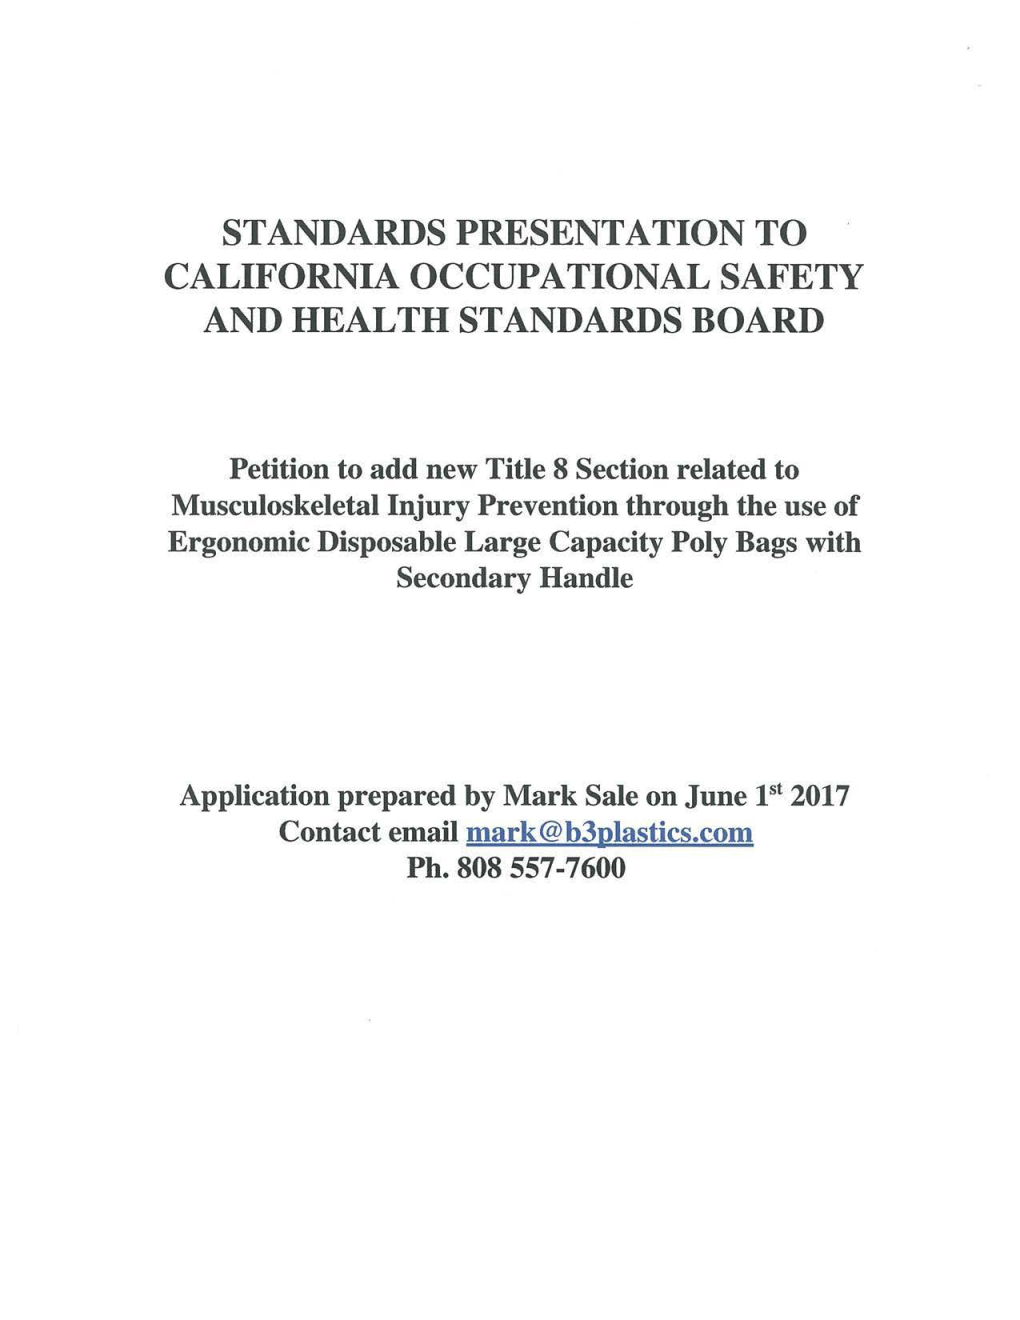 Standards Presentation to California Occupational Safety and Health Standards Board